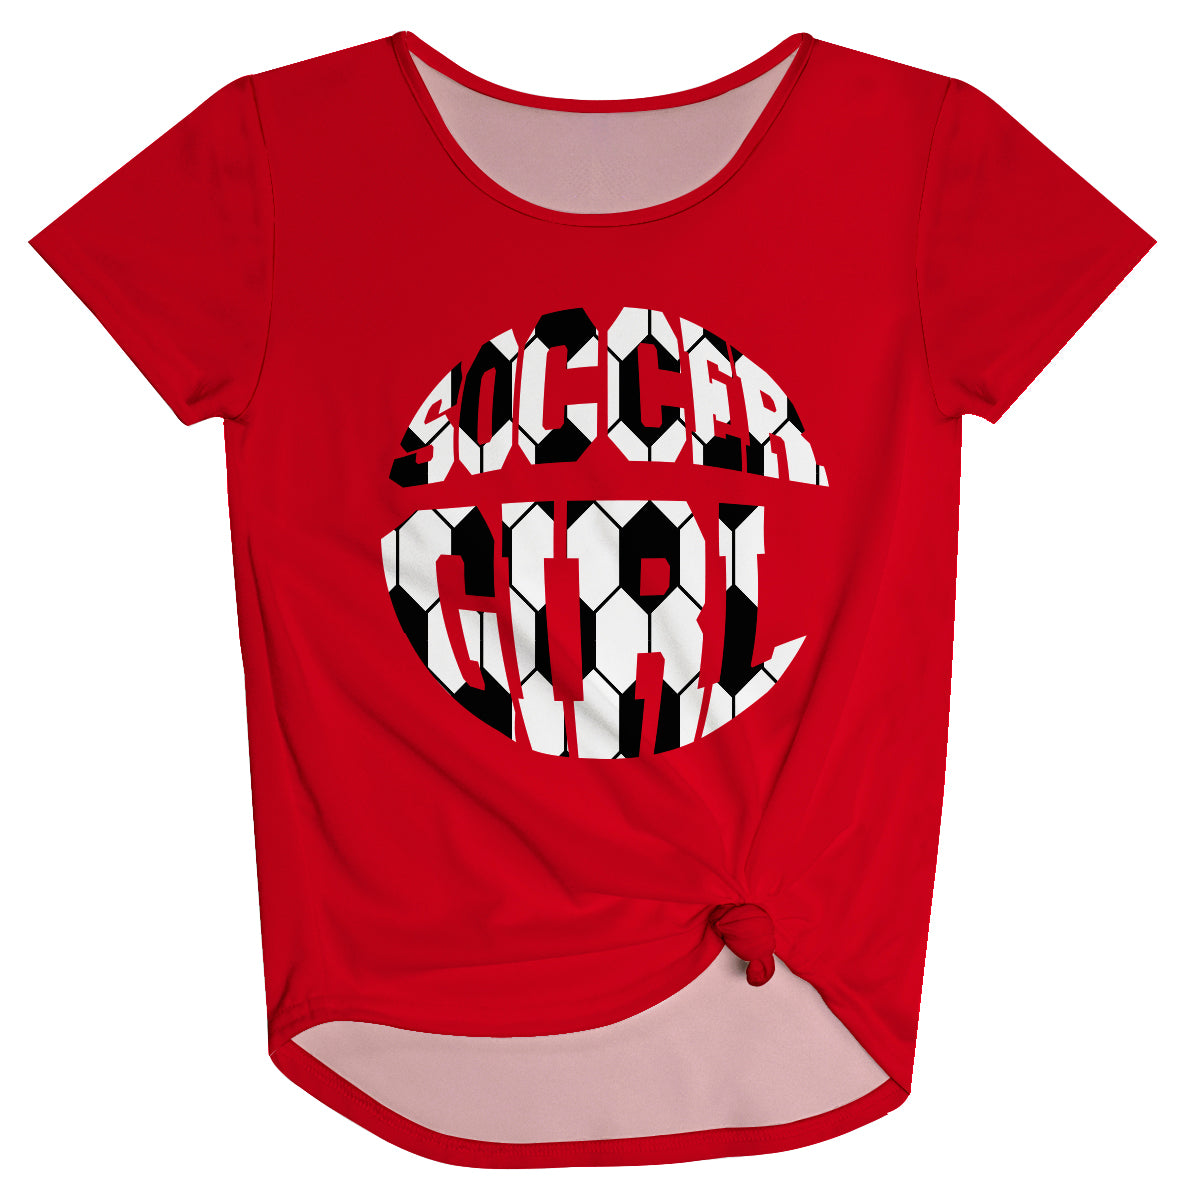 Soccer Girl Red Knot Top